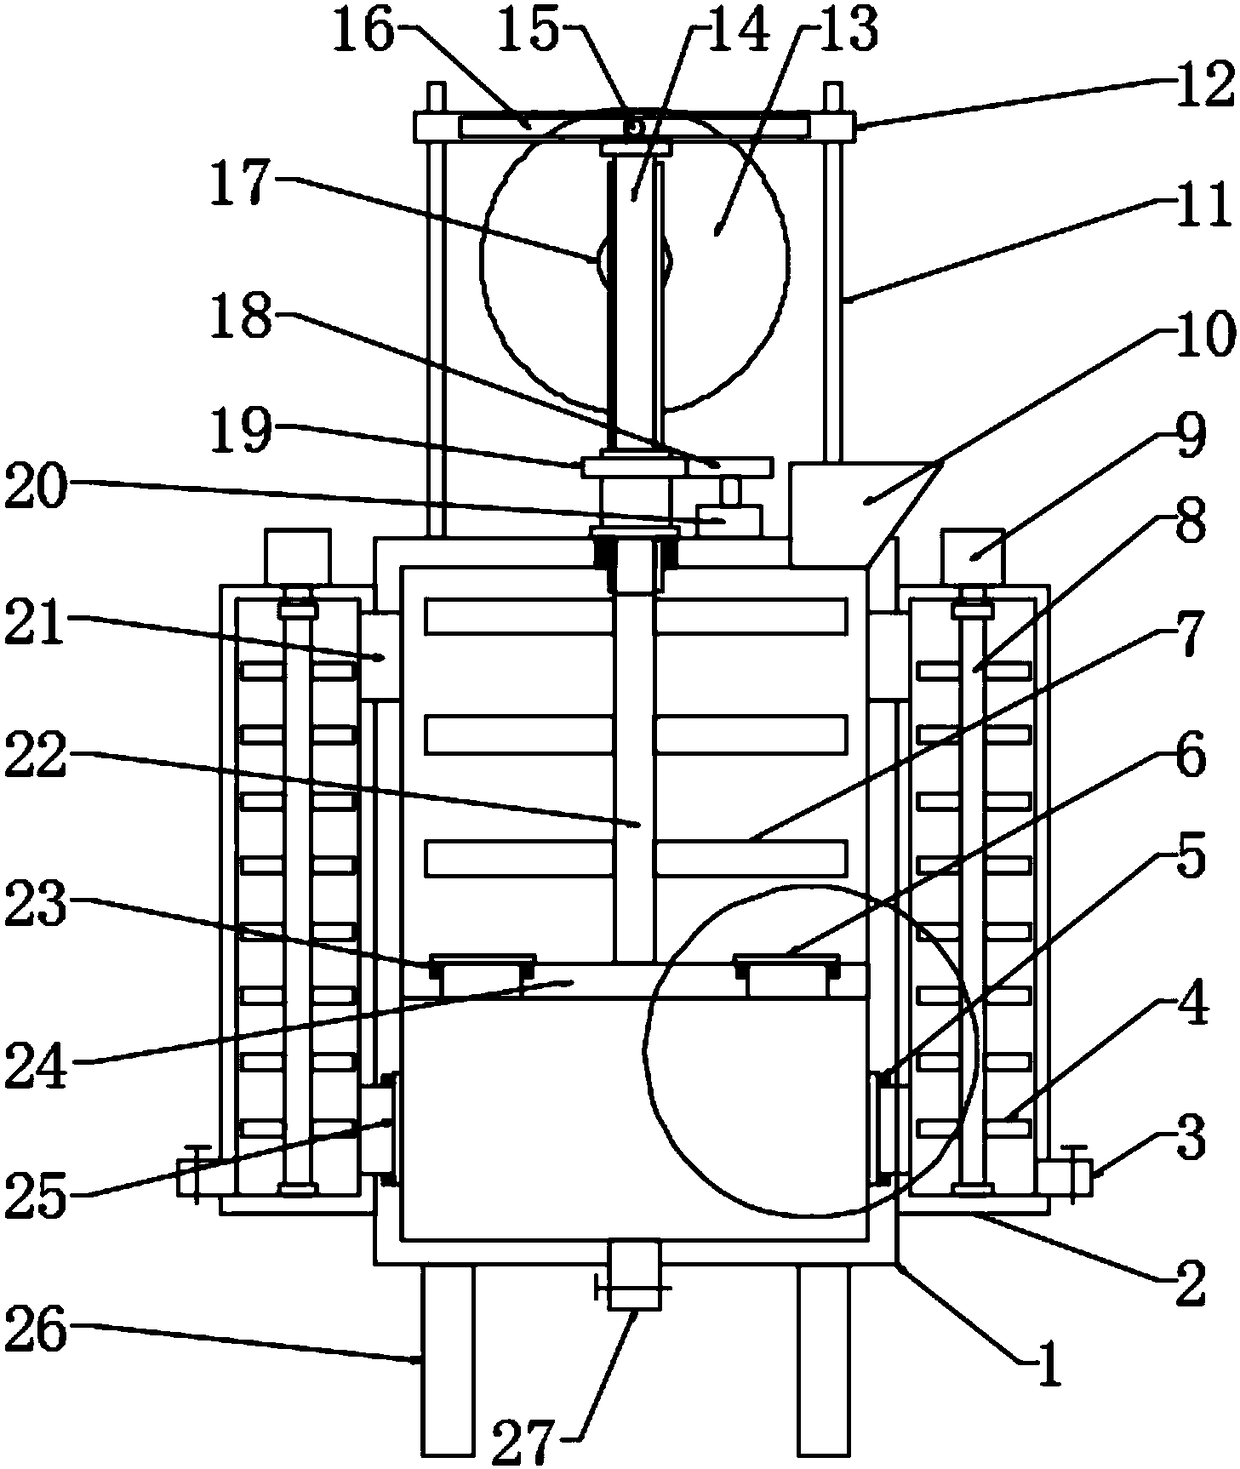 Circulating type paint mixing device for producing petroleum pipeline